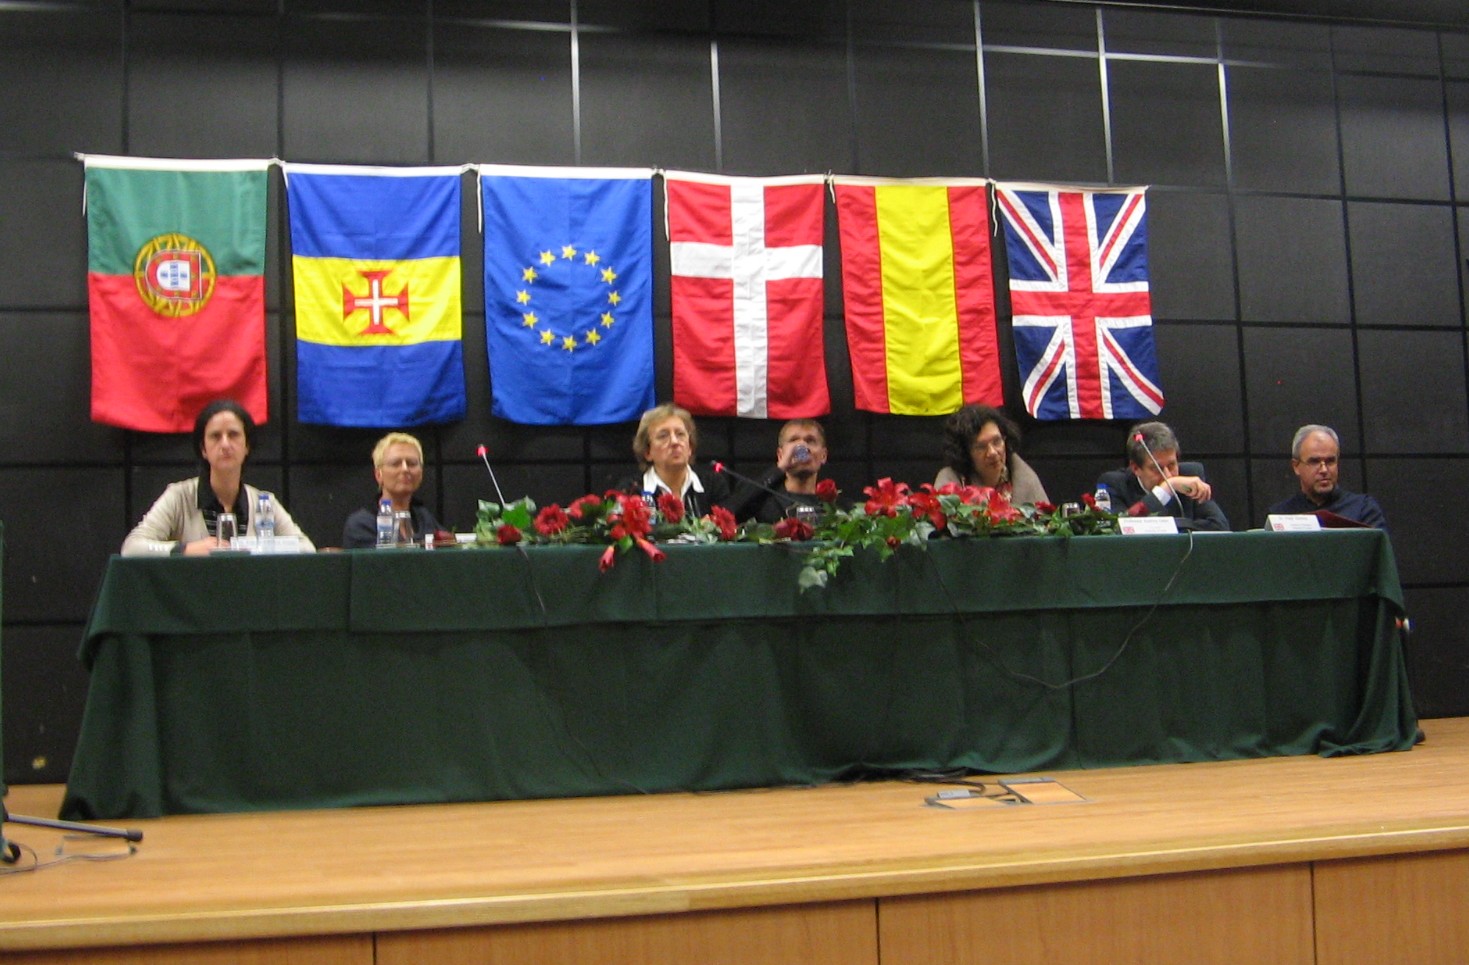 February 6, 2007 in Funchal, Madeira, Portugal: Interculturality, Education and Citizenship.: a public conference. It was organized by the Local Educational Authority of Madeira.